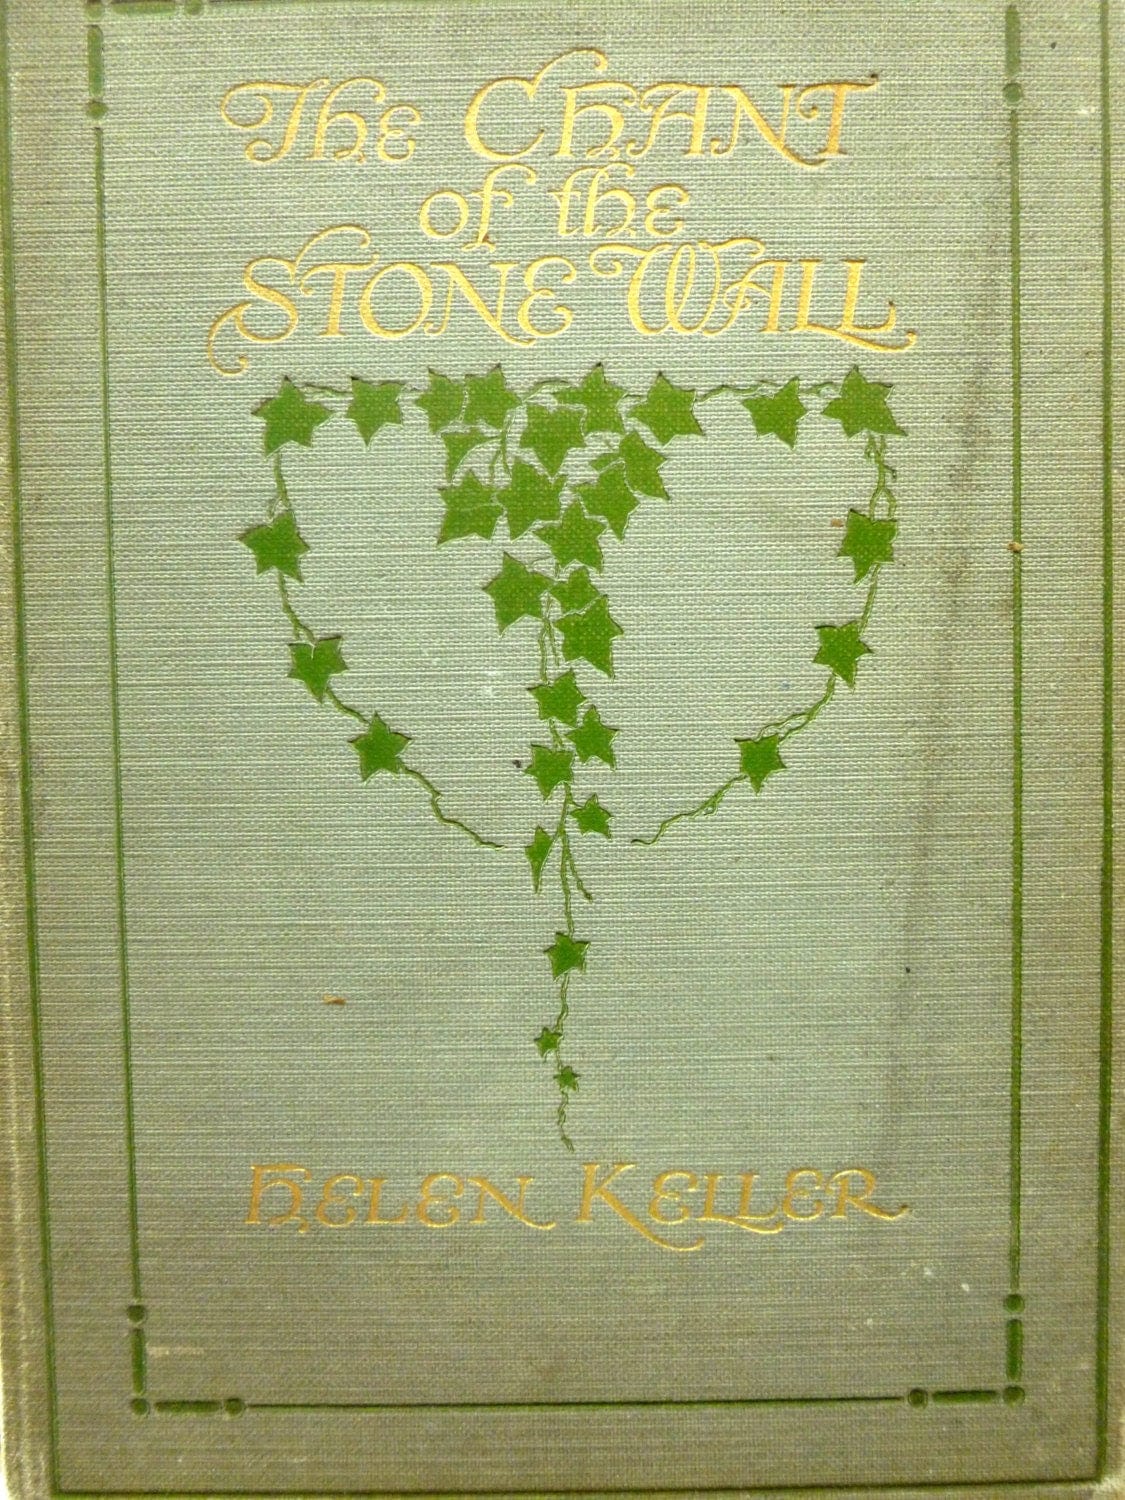 Antique Poetry Book Helen Keller Chant of the Stone Wall Scarce First Edition Hardback Suffragette Interest 1910